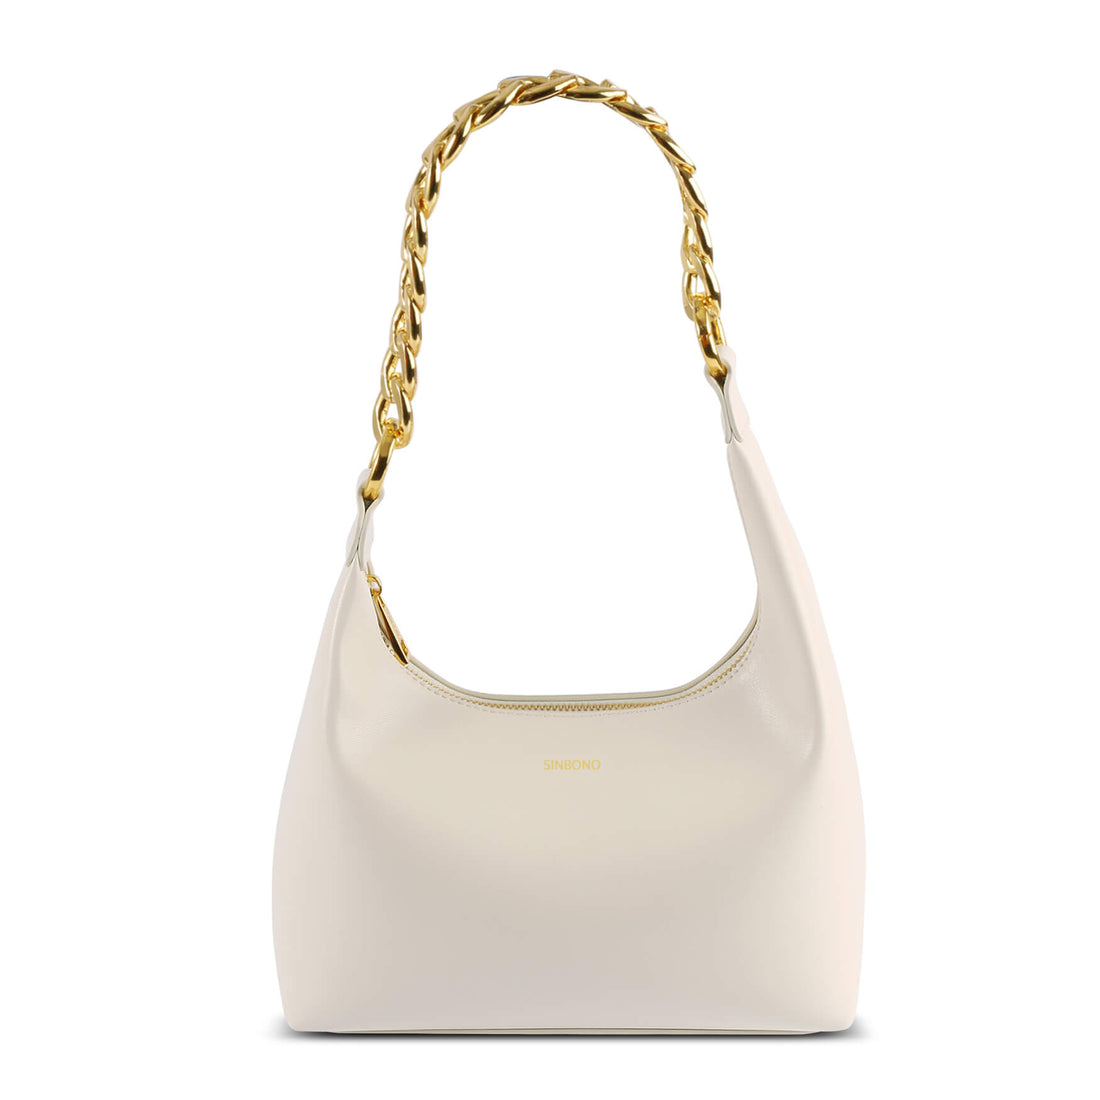 SINBONO Vienna Ivory Shoulder Bag-Made from Soft Leather 